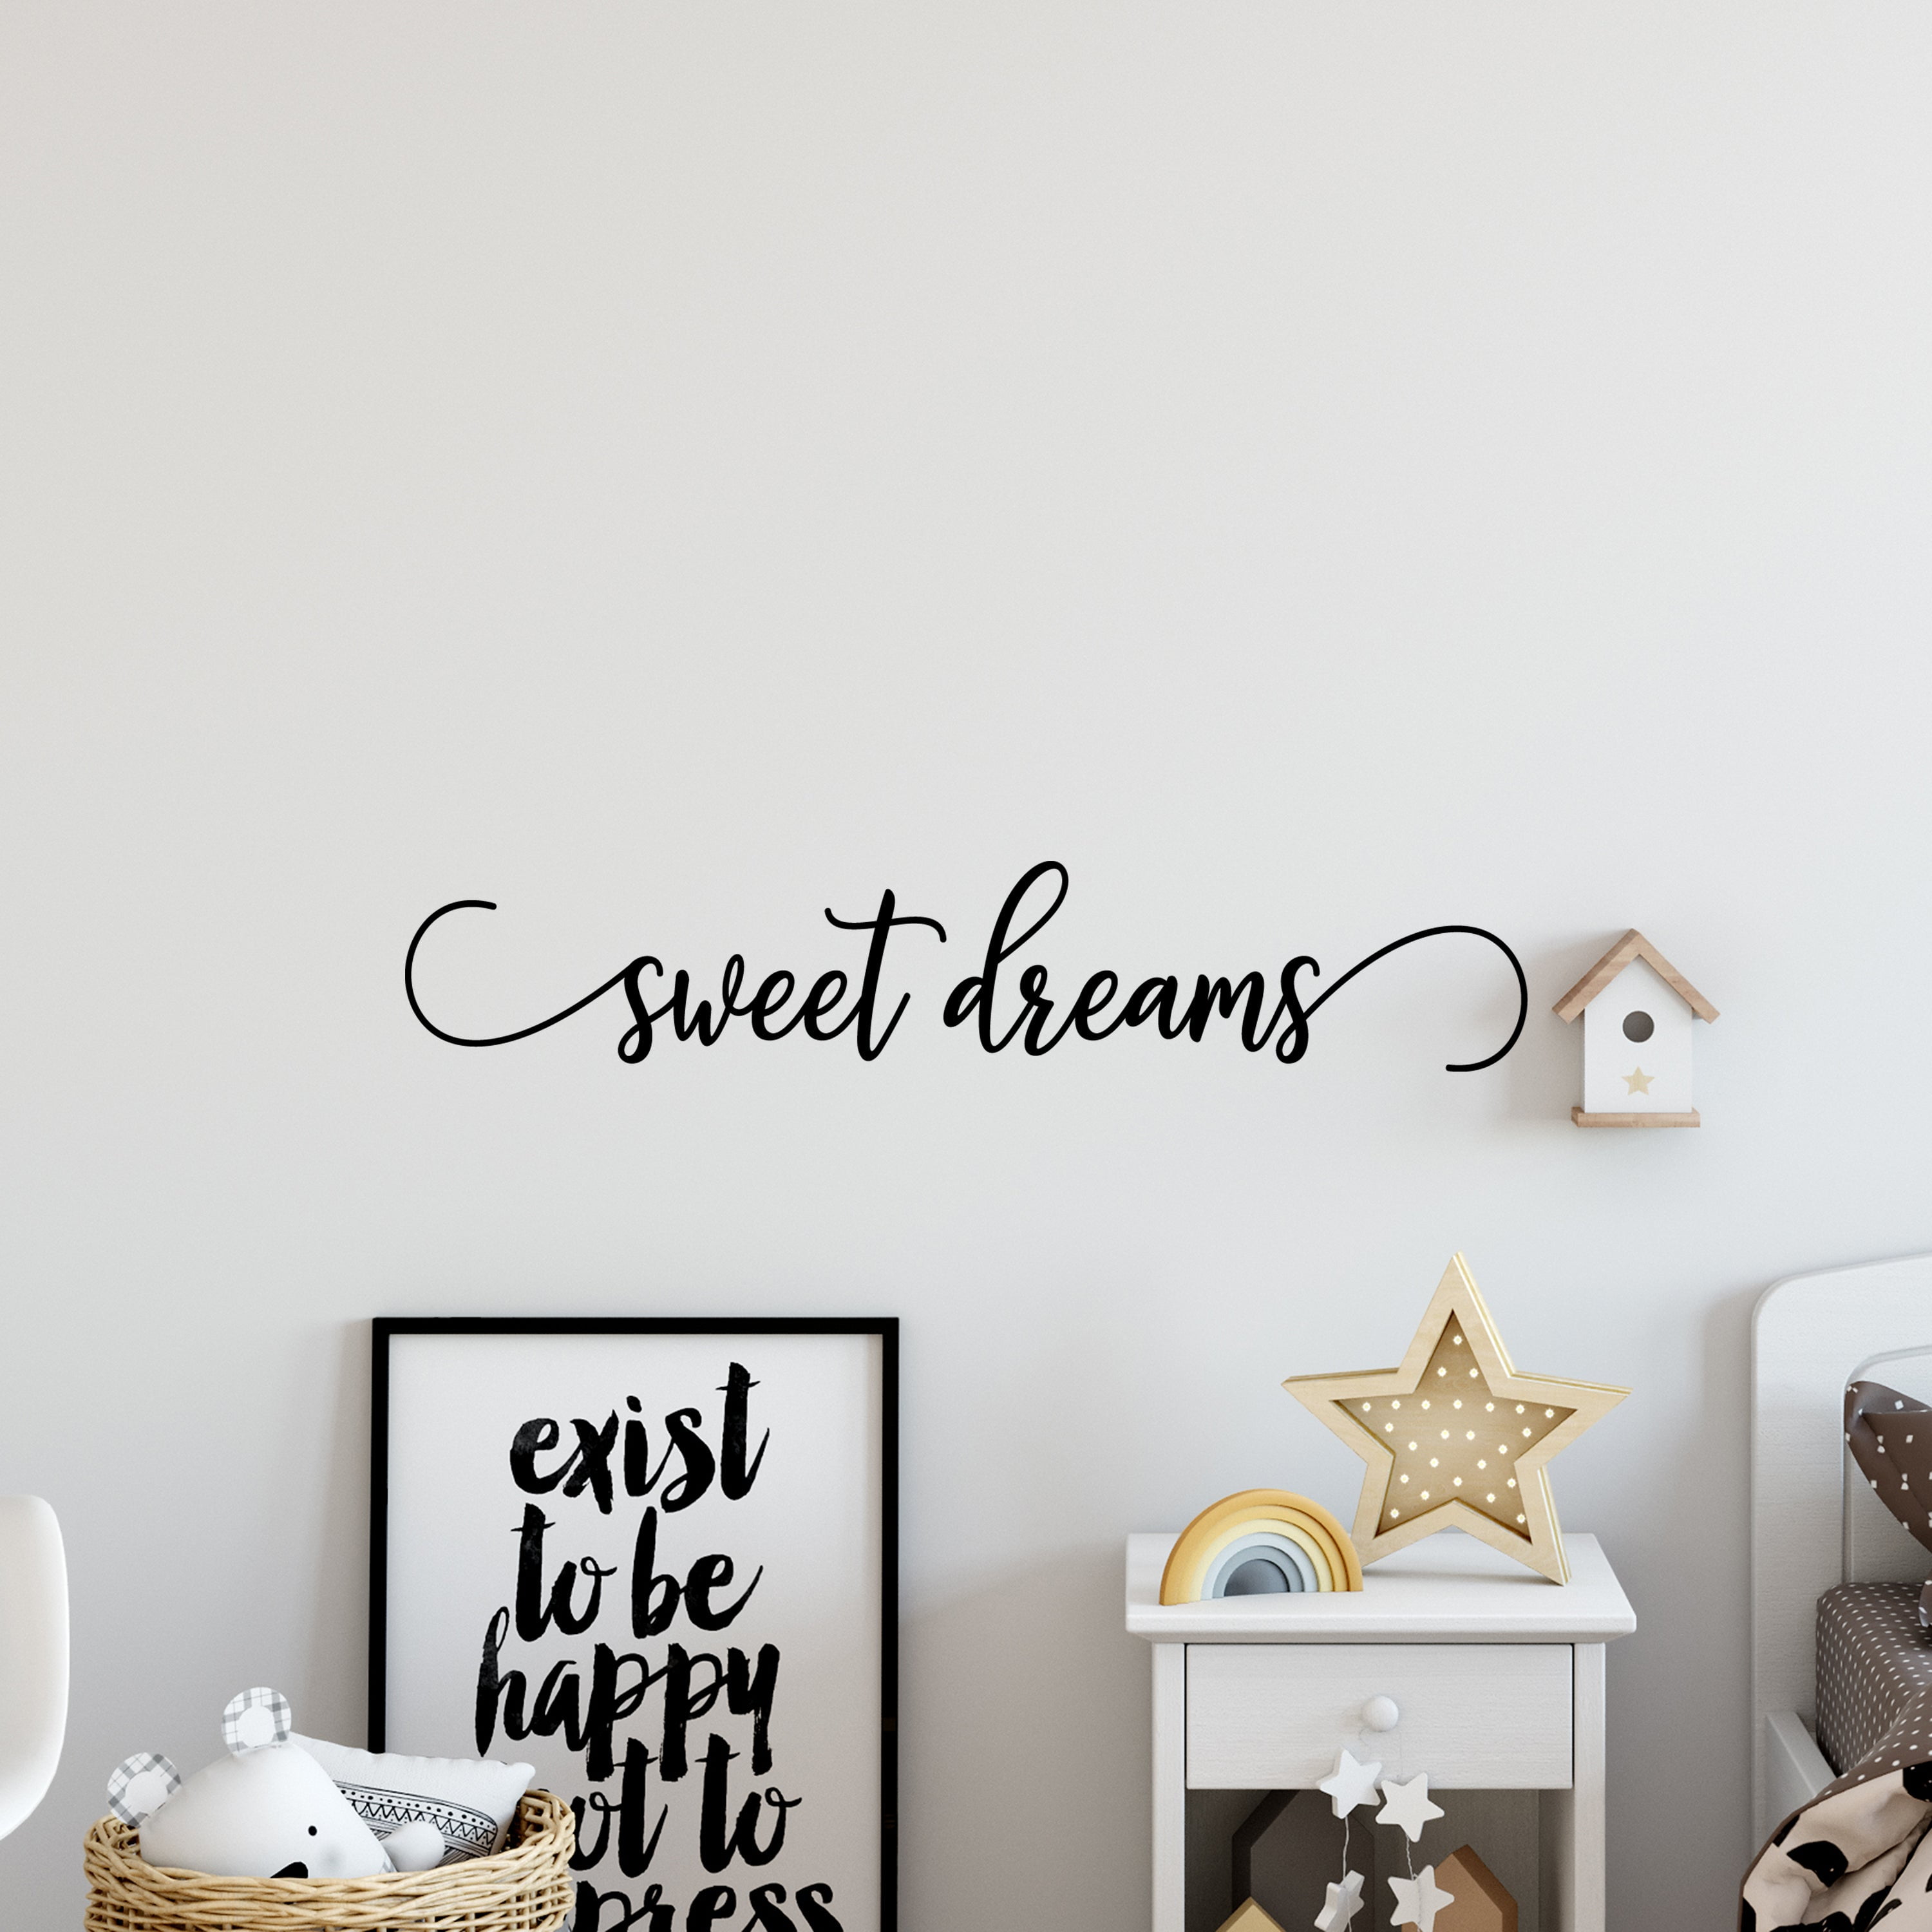 Harry Potter Muggles Quote Peel and Stick Giant Wall Decals